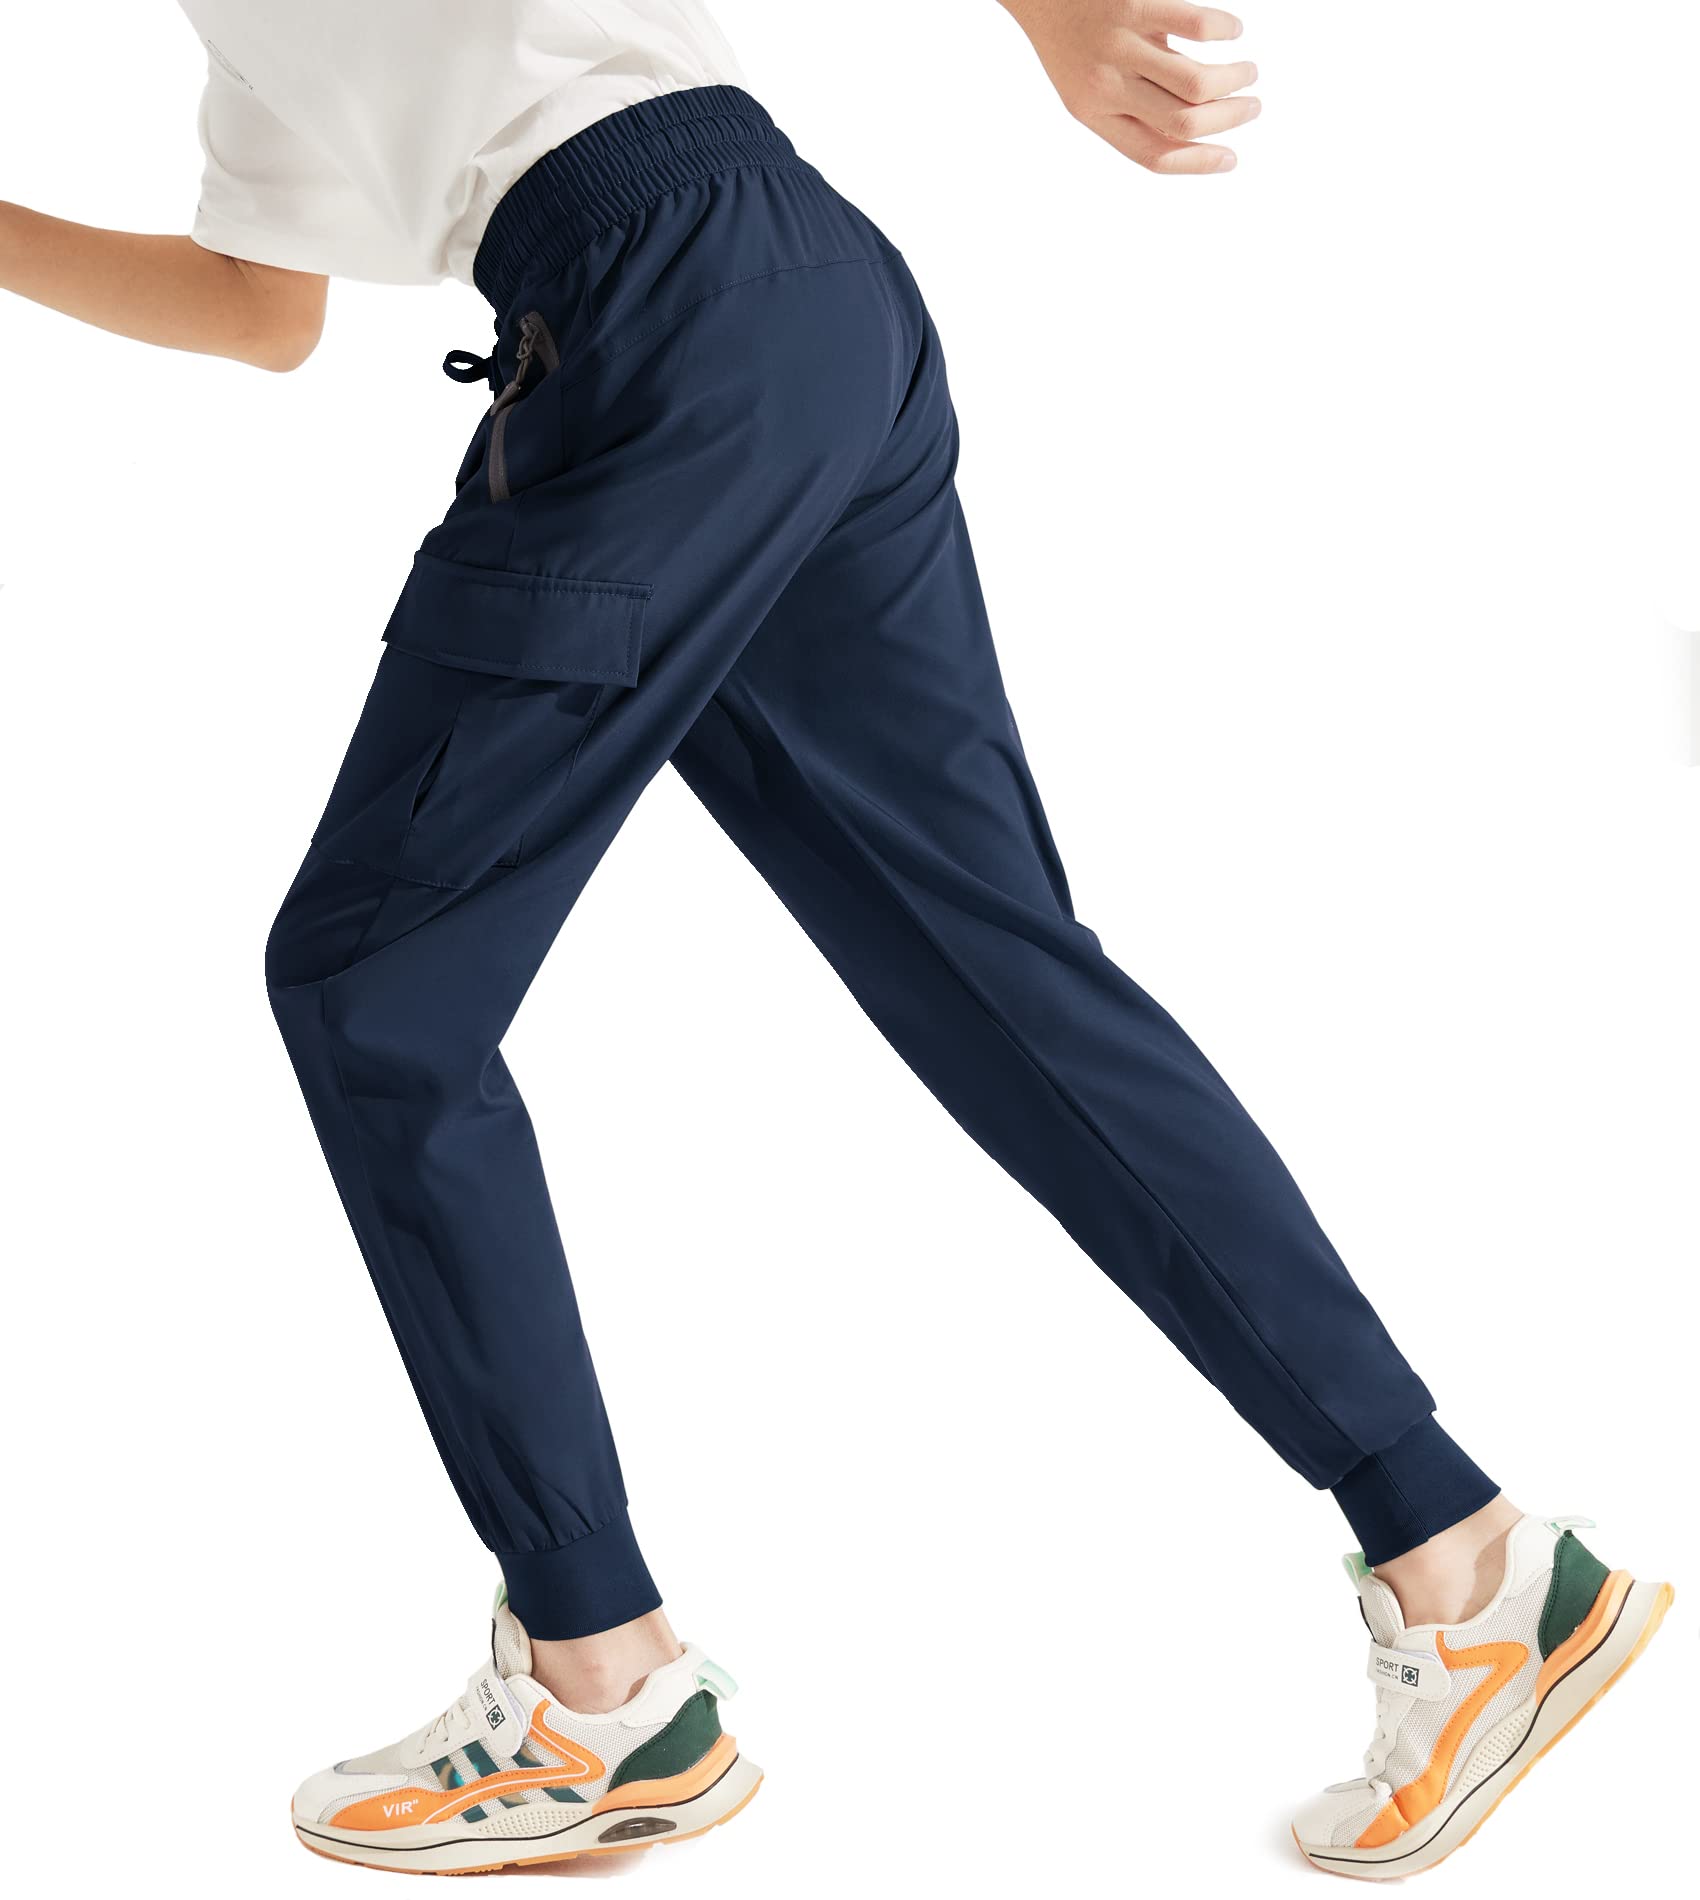 Libin Boy's Youth Cargo Joggers Pants Quick Dry Hiking Active Pull-On  Lightweight Tapered Pants for Sports Outdoor Running 03-navy Blue X-Large